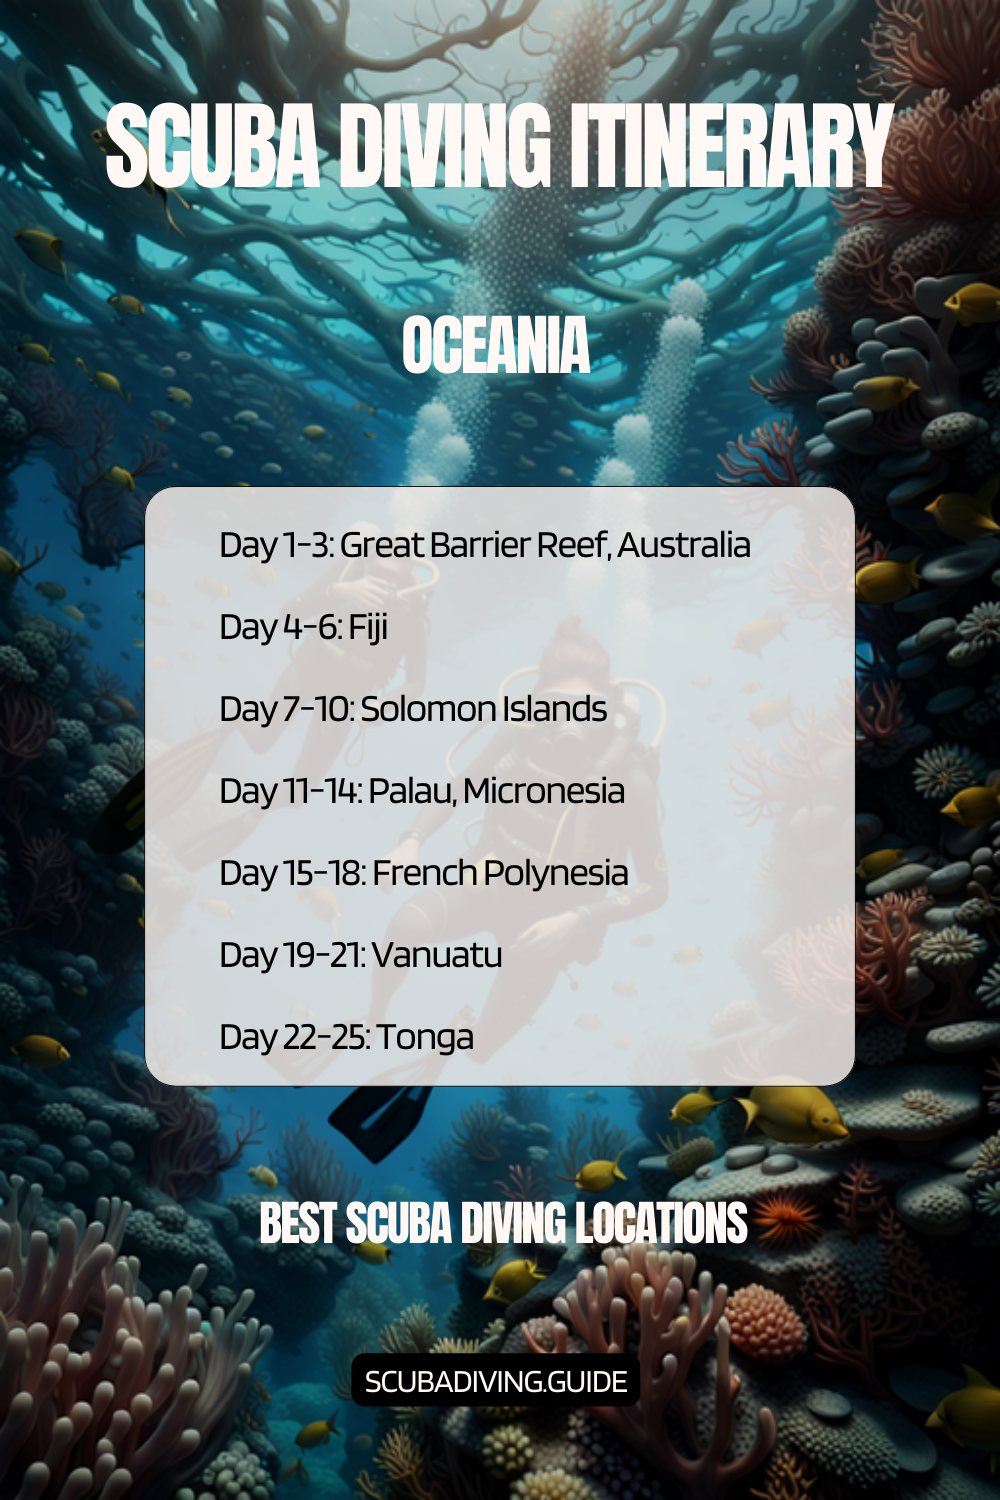 Oceania Recommended Scuba Diving Itinerary